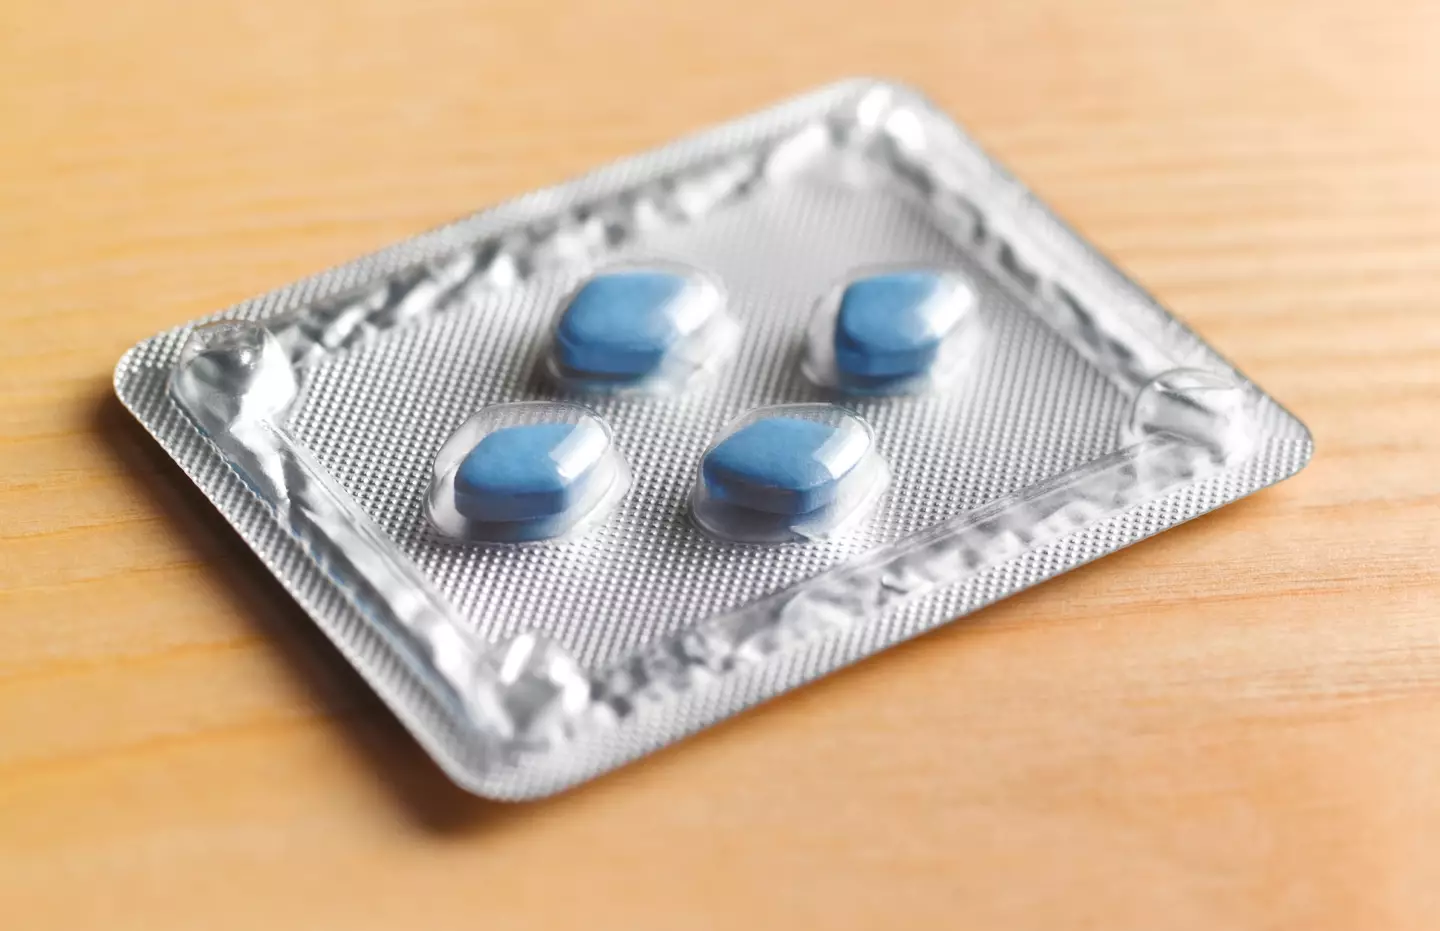 Viagra has some other applications besides the obvious, but medical studies have failed to find evidence of it doing much for women. (Getty Stock Photo)